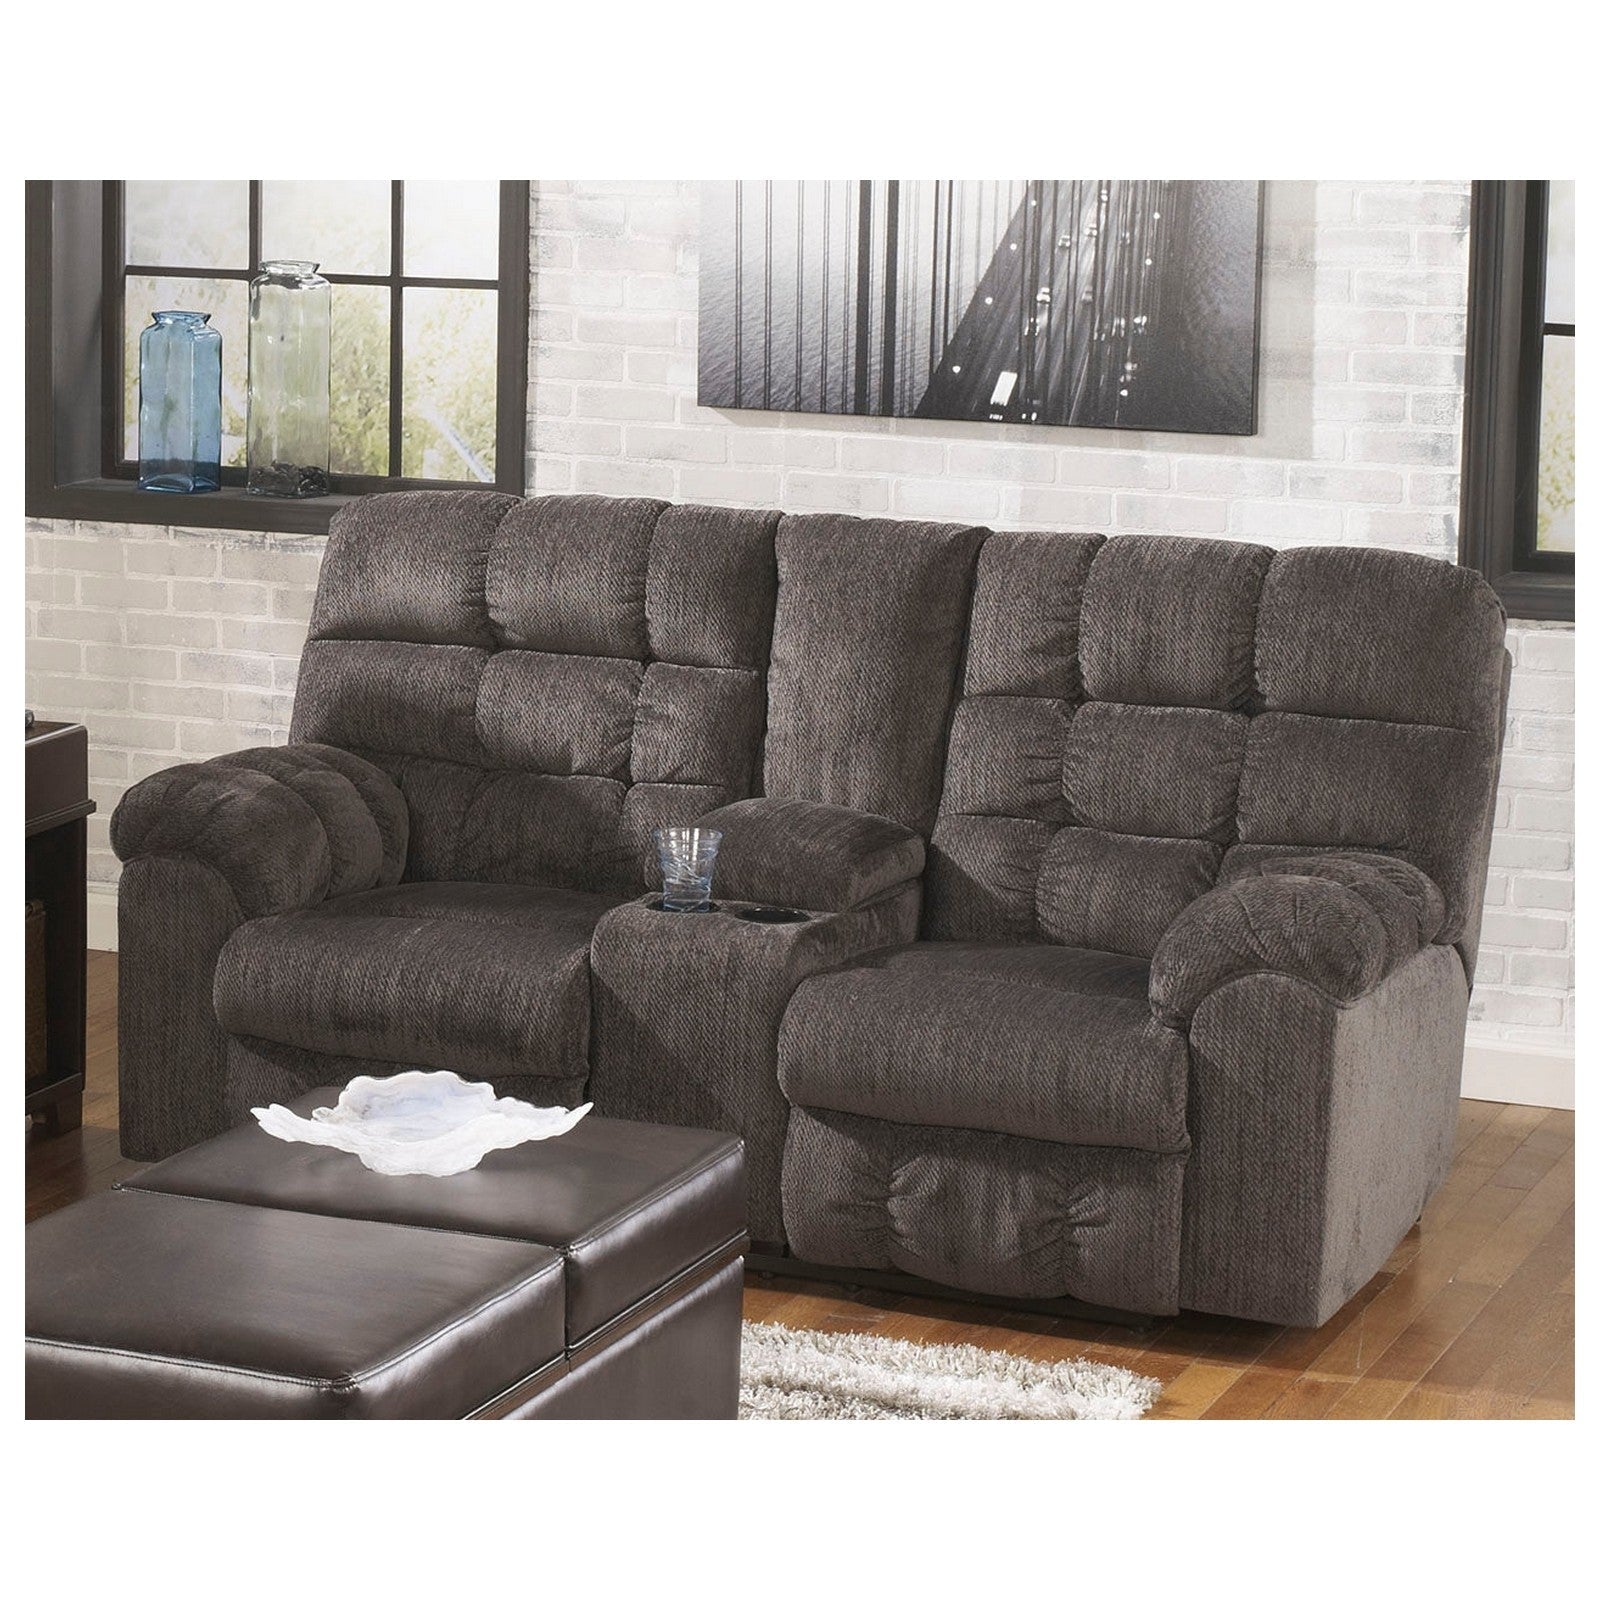 Acieona Reclining Loveseat with Console Ash-5830094